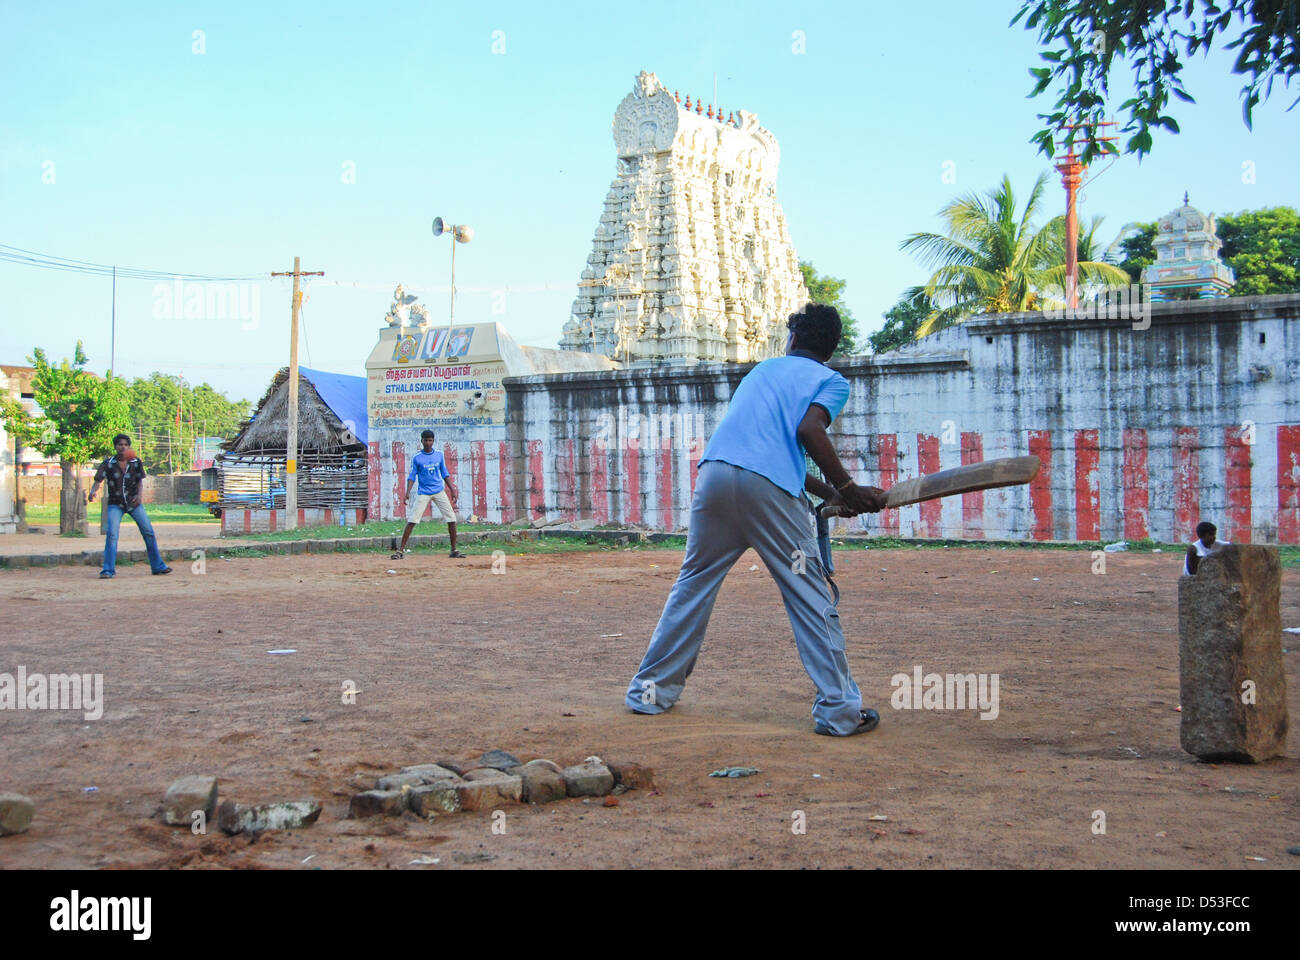 Children Playing Cricket in front of a temple, Mamallapuram, Tamil Nadu, India. Stock Photo